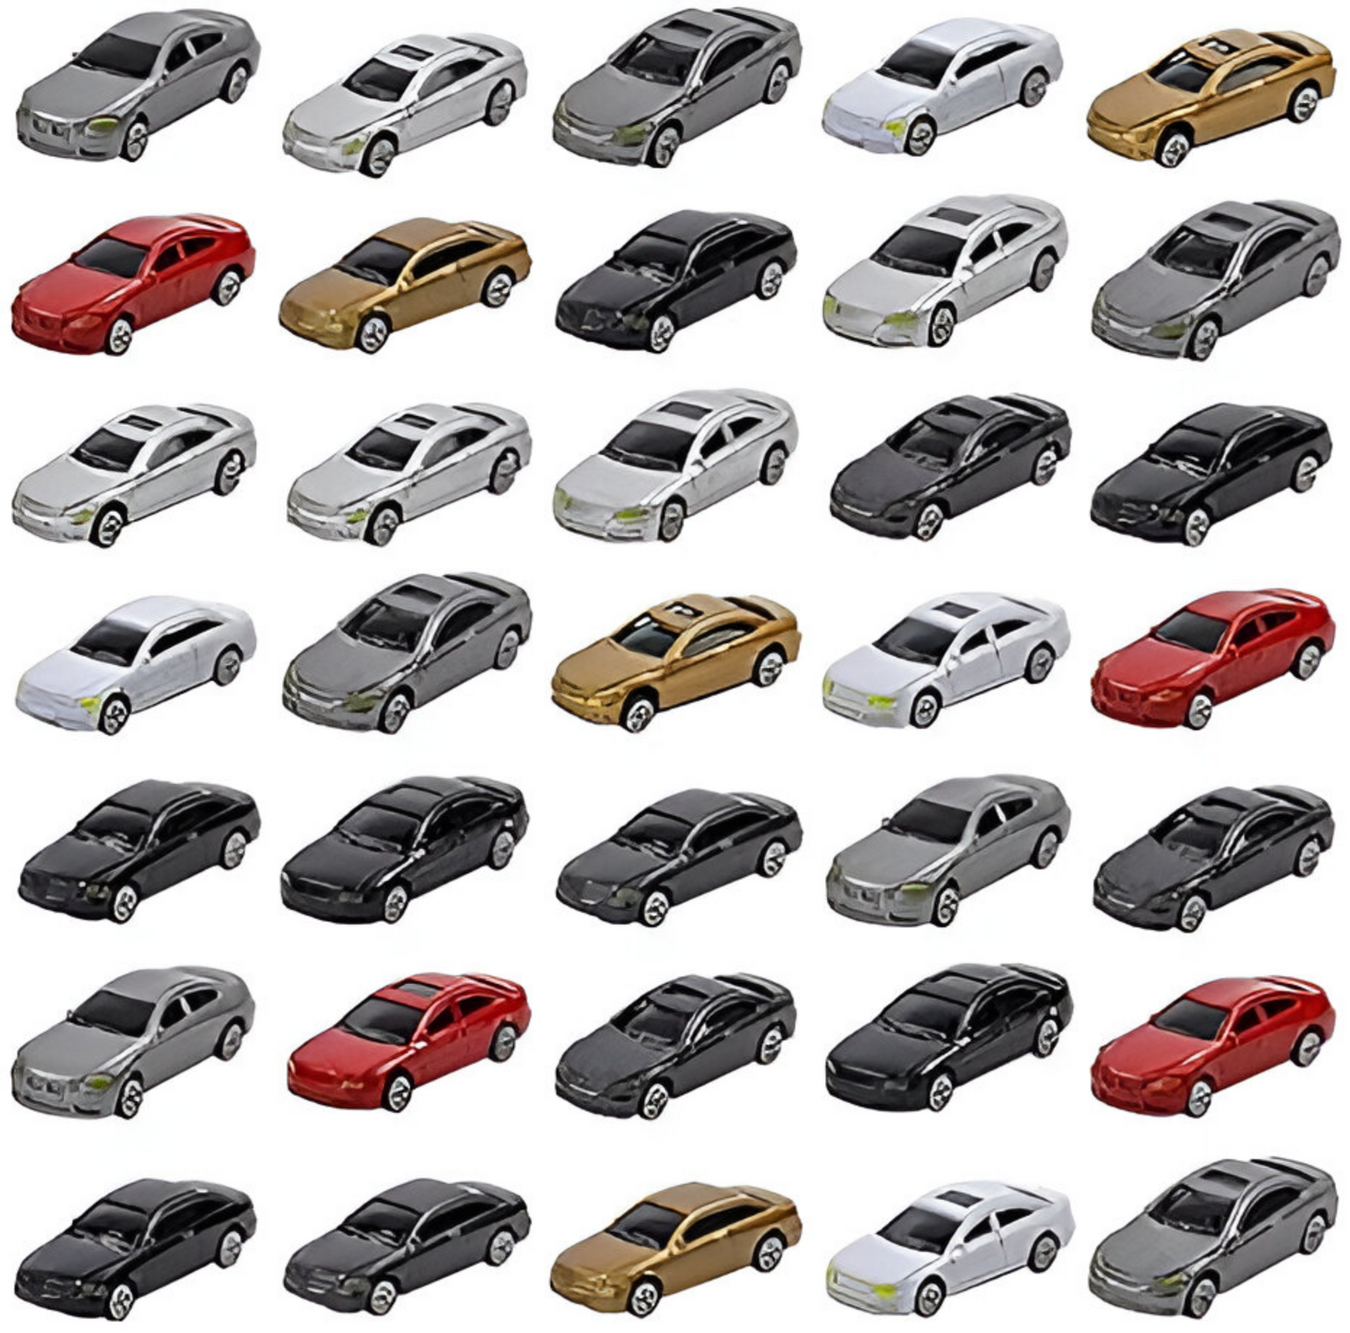 Die Cast Cars of all makes